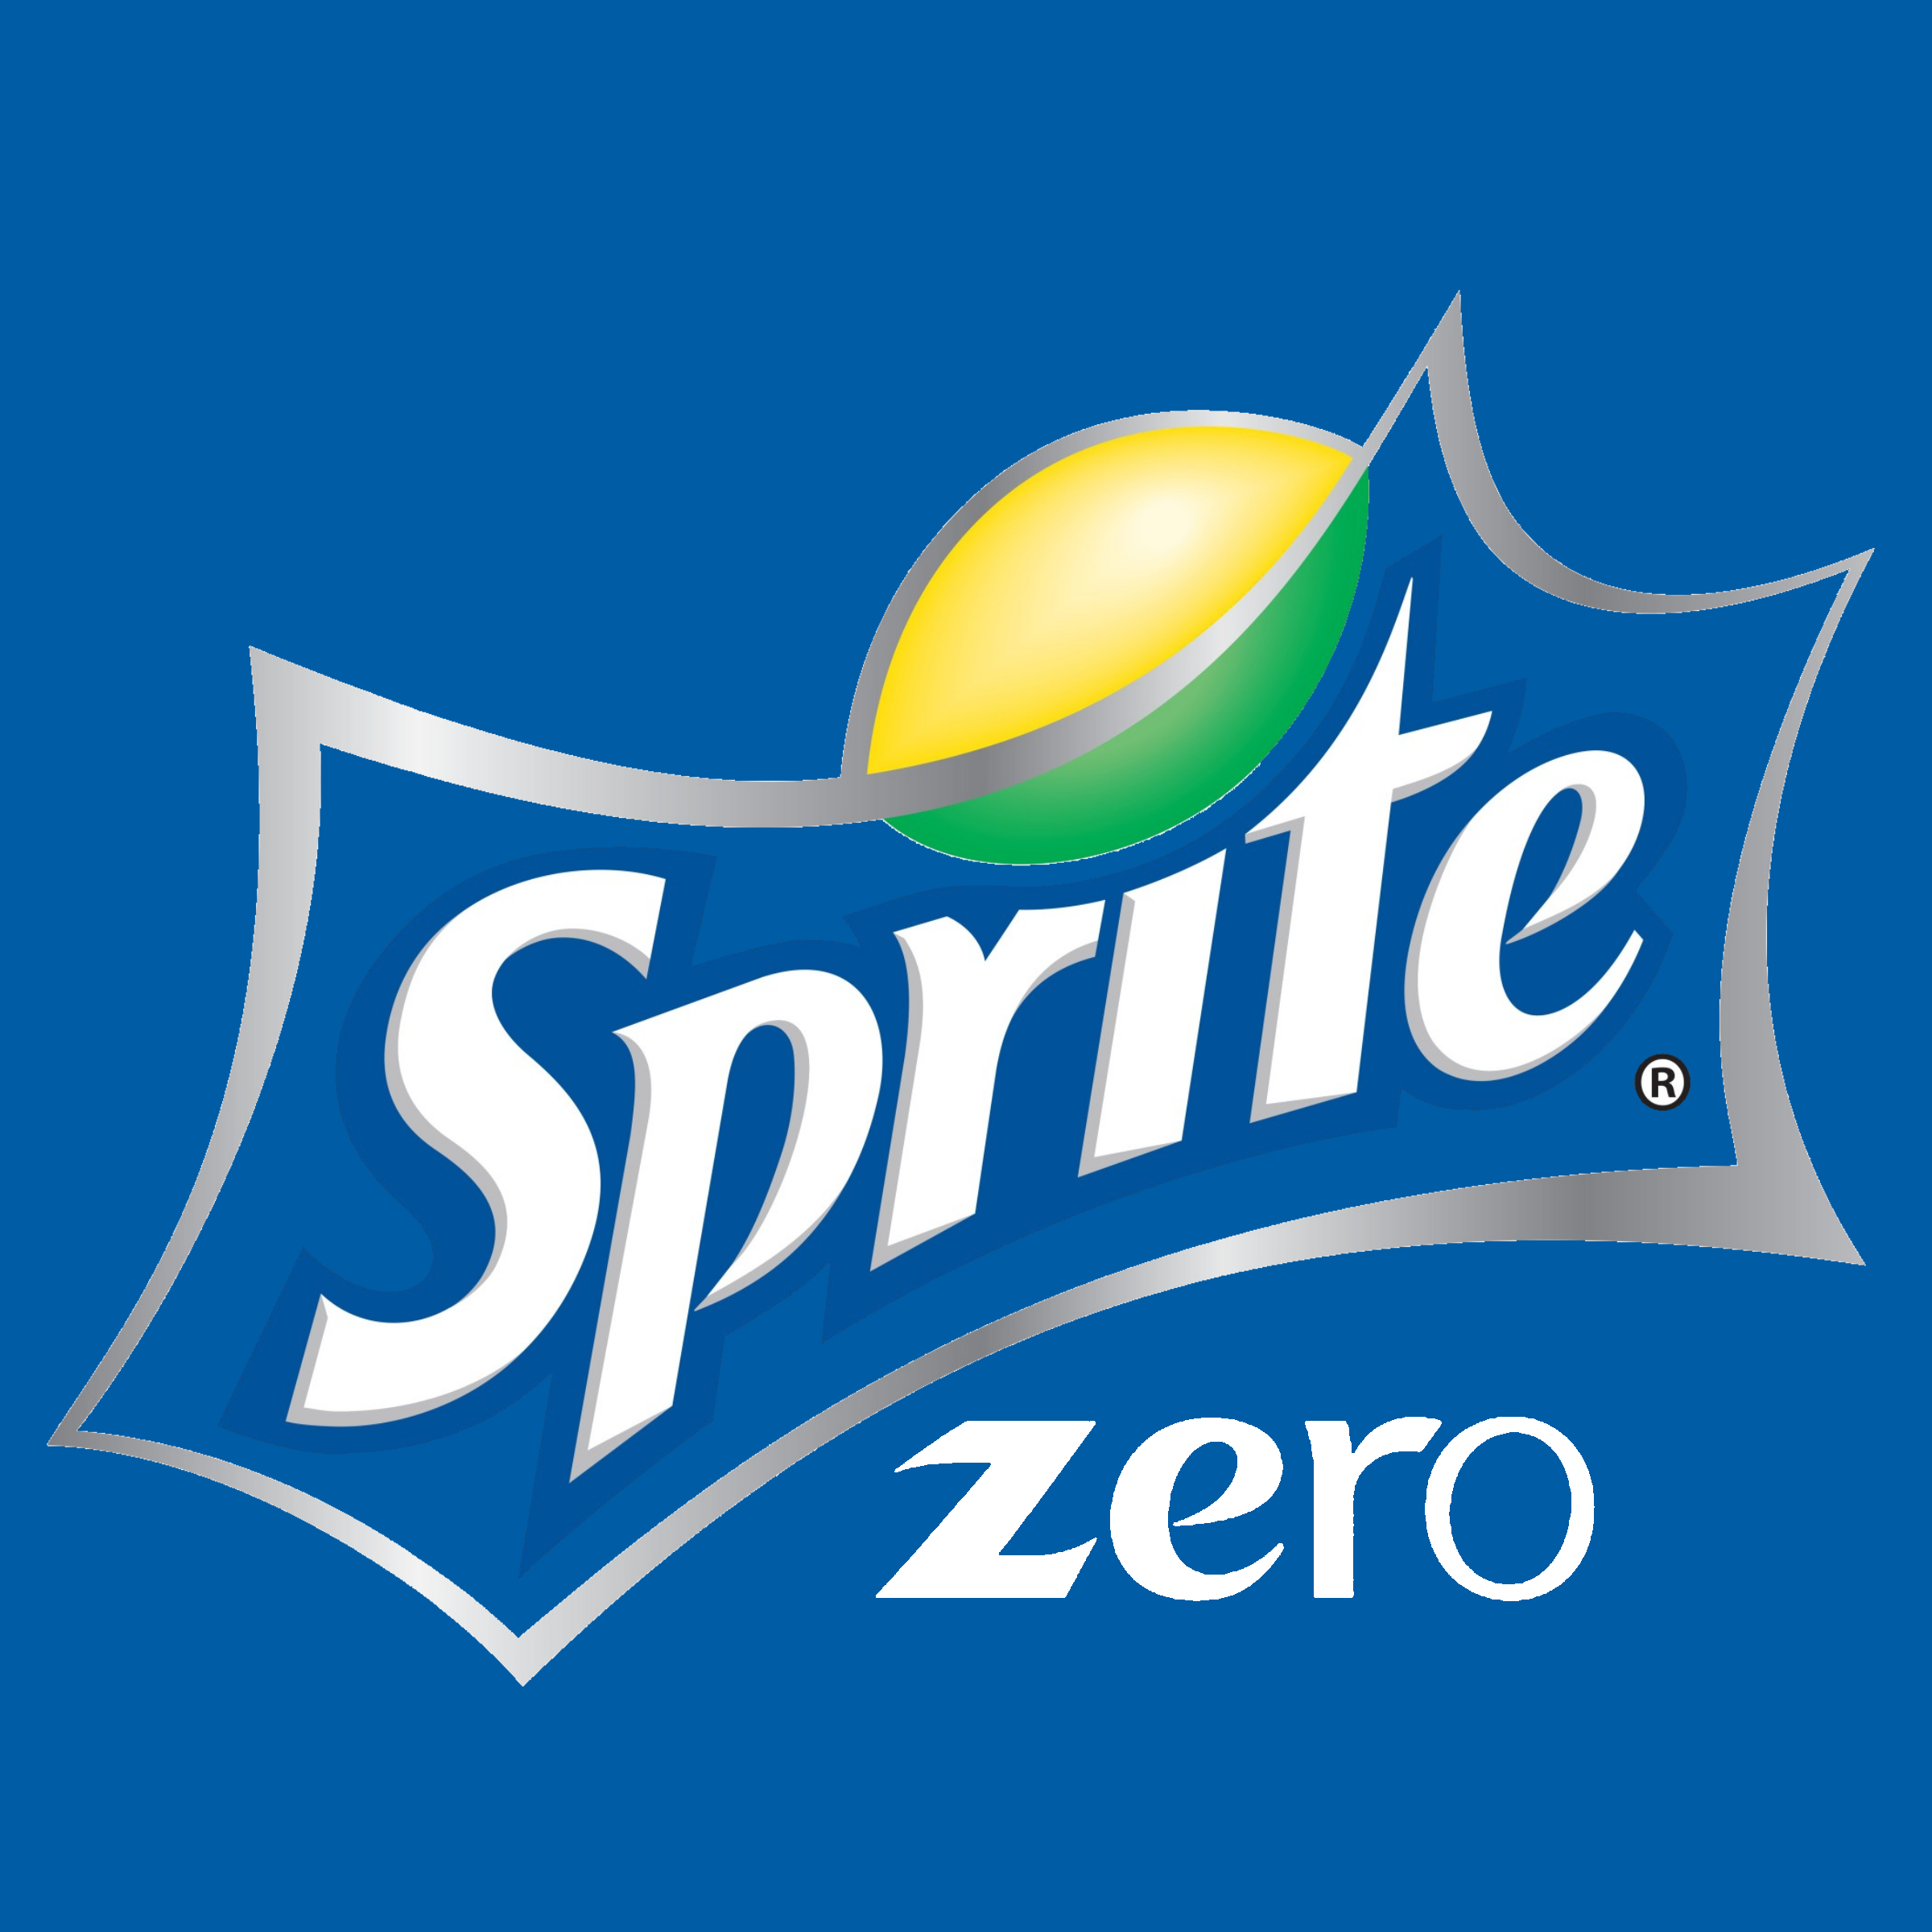 https://static.wikia.nocookie.net/the-soda/images/3/3c/Sprite_Zero_Logo.png/revision/latest?cb=20190821230051